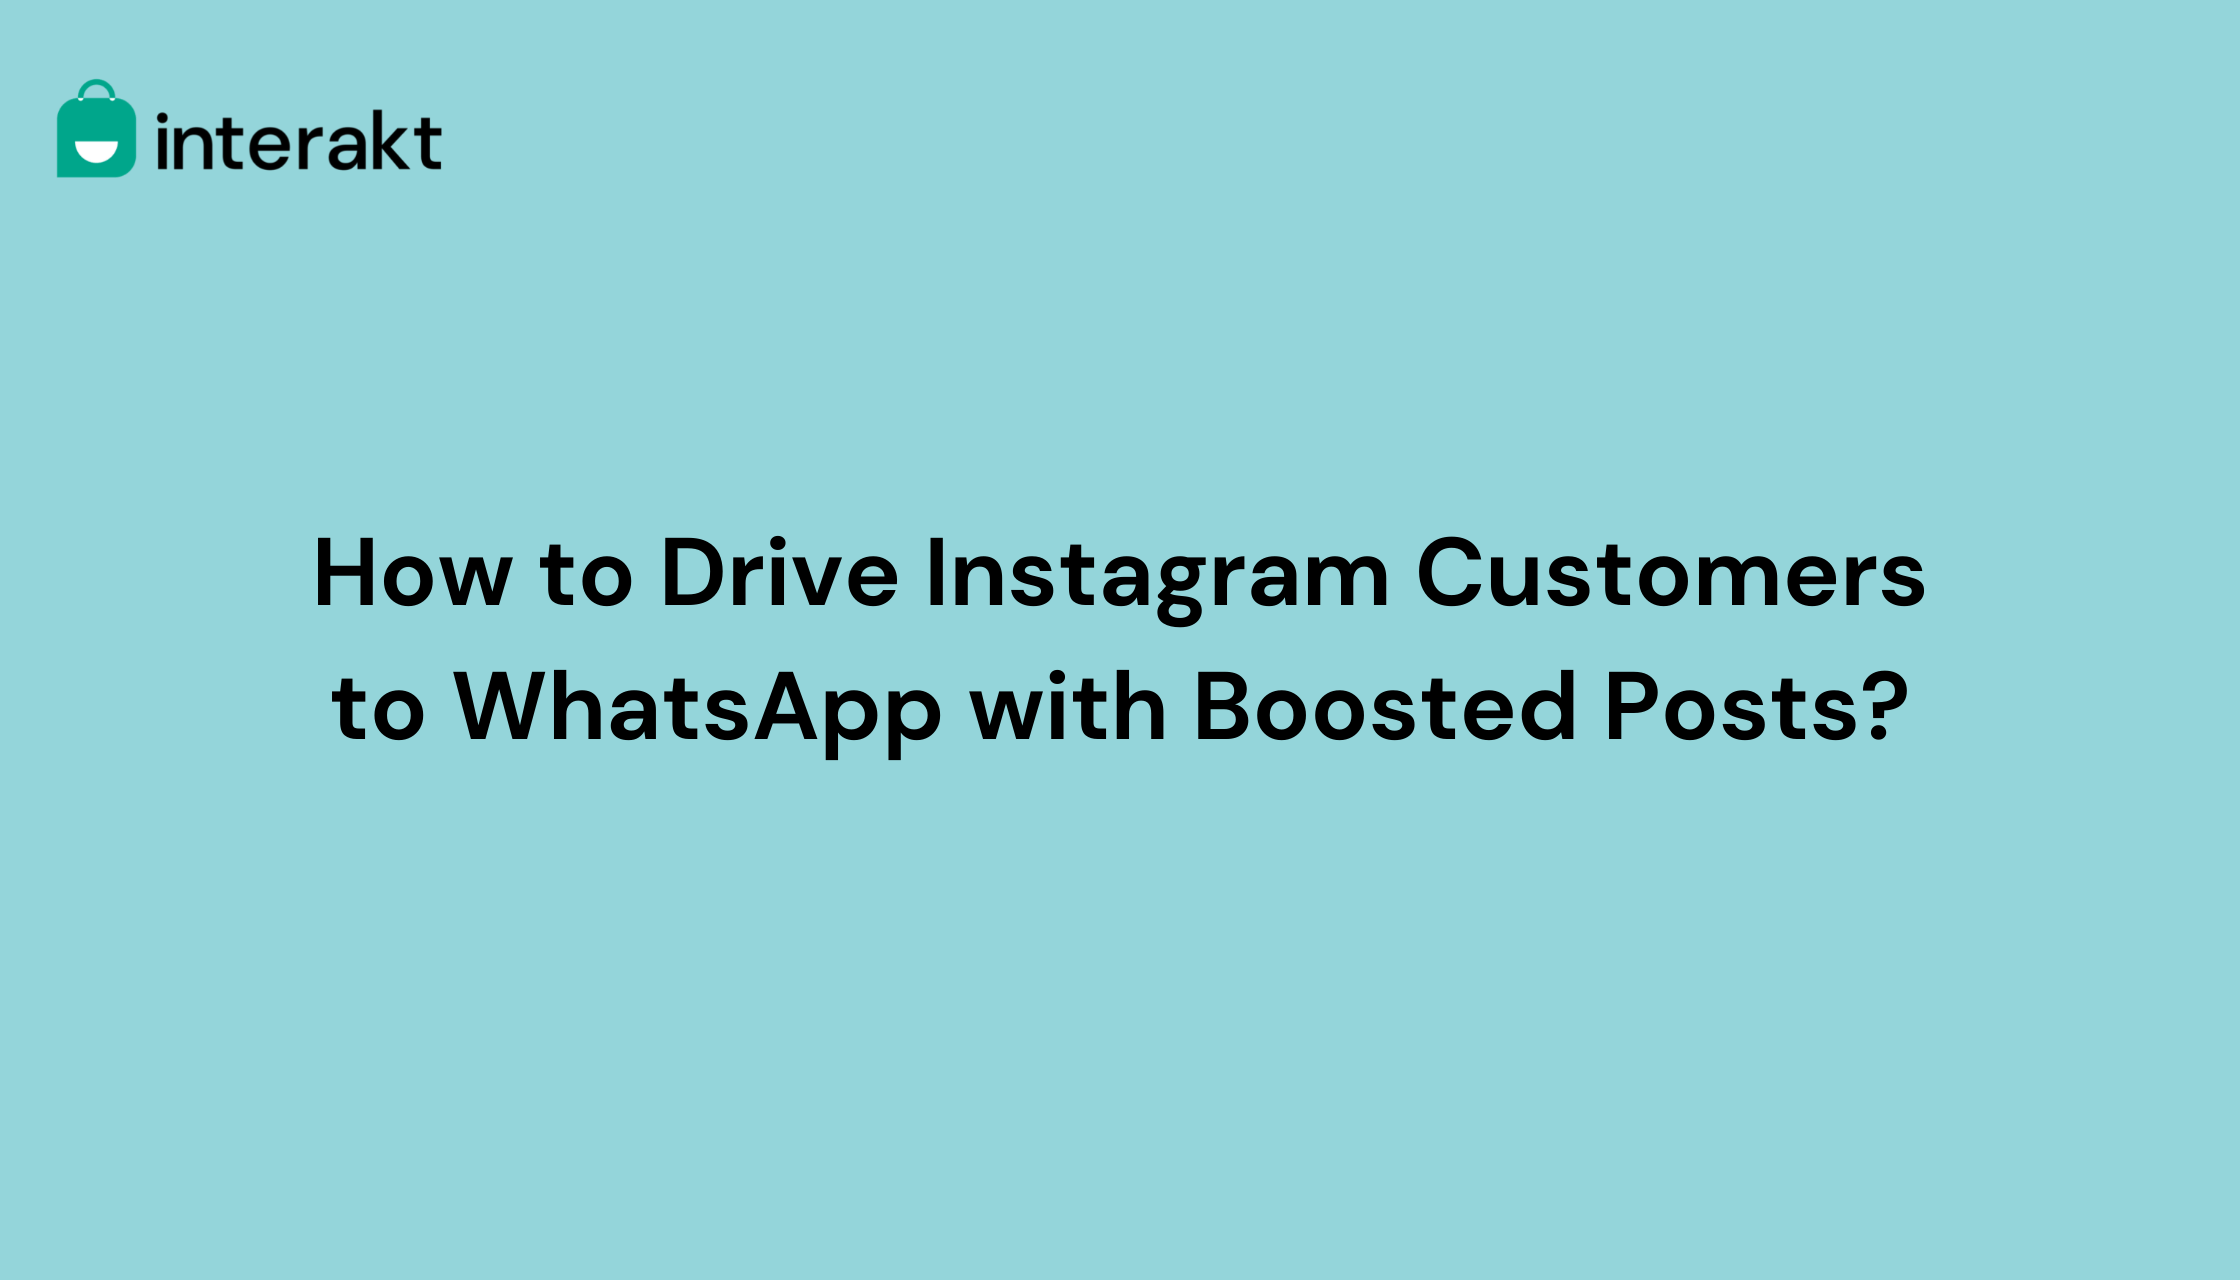 How to Drive Instagram Customers to WhatsApp with Boosted Posts